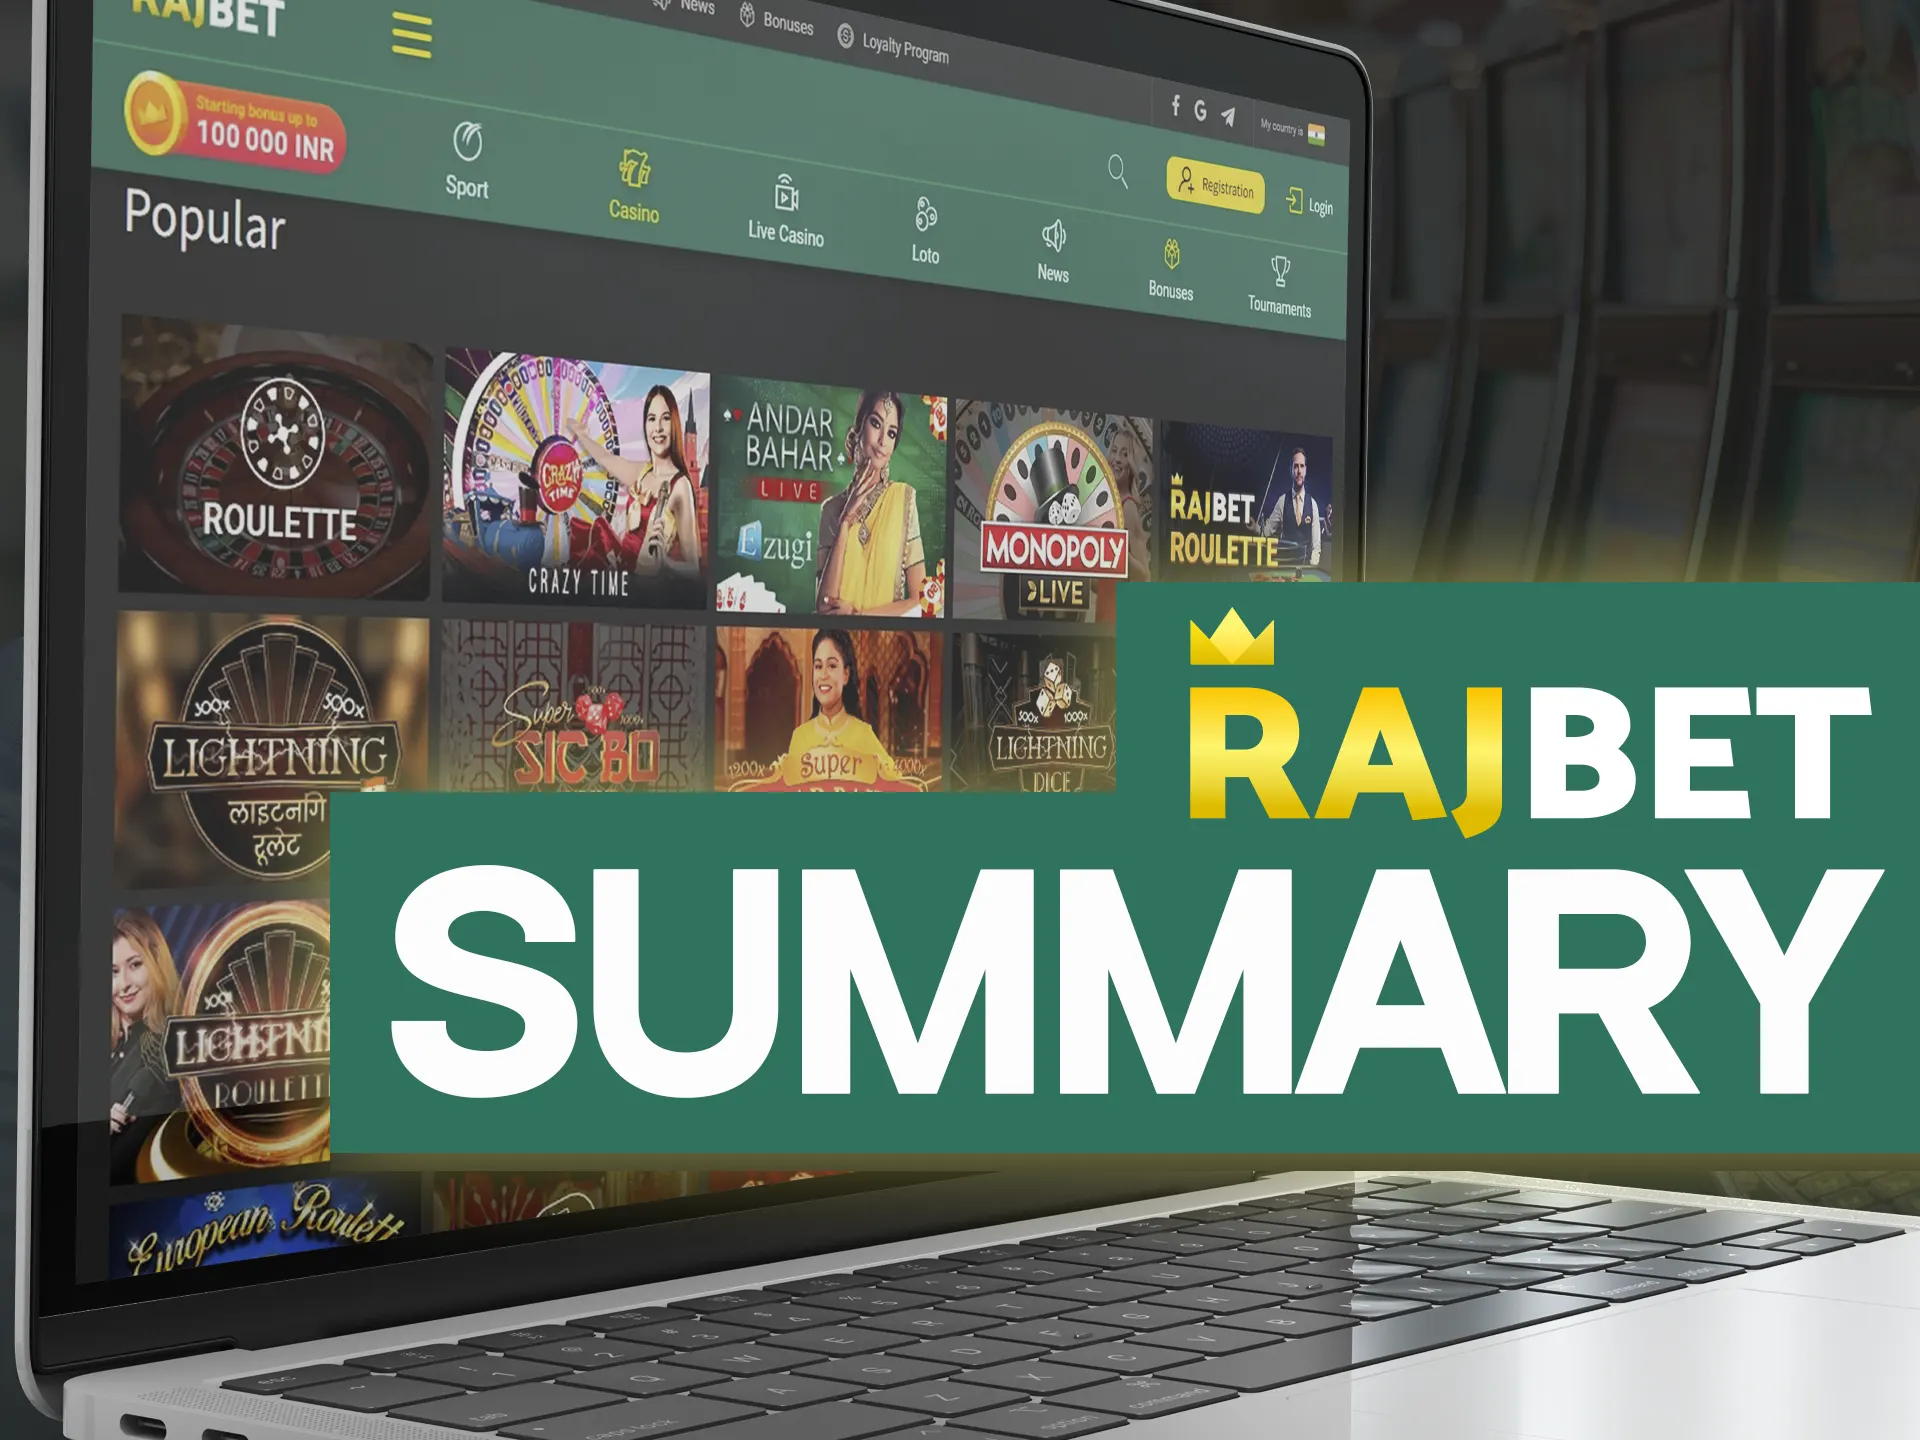 Rajbet Casino features something for everyone, whether you are a novice or a seasoned gambler.